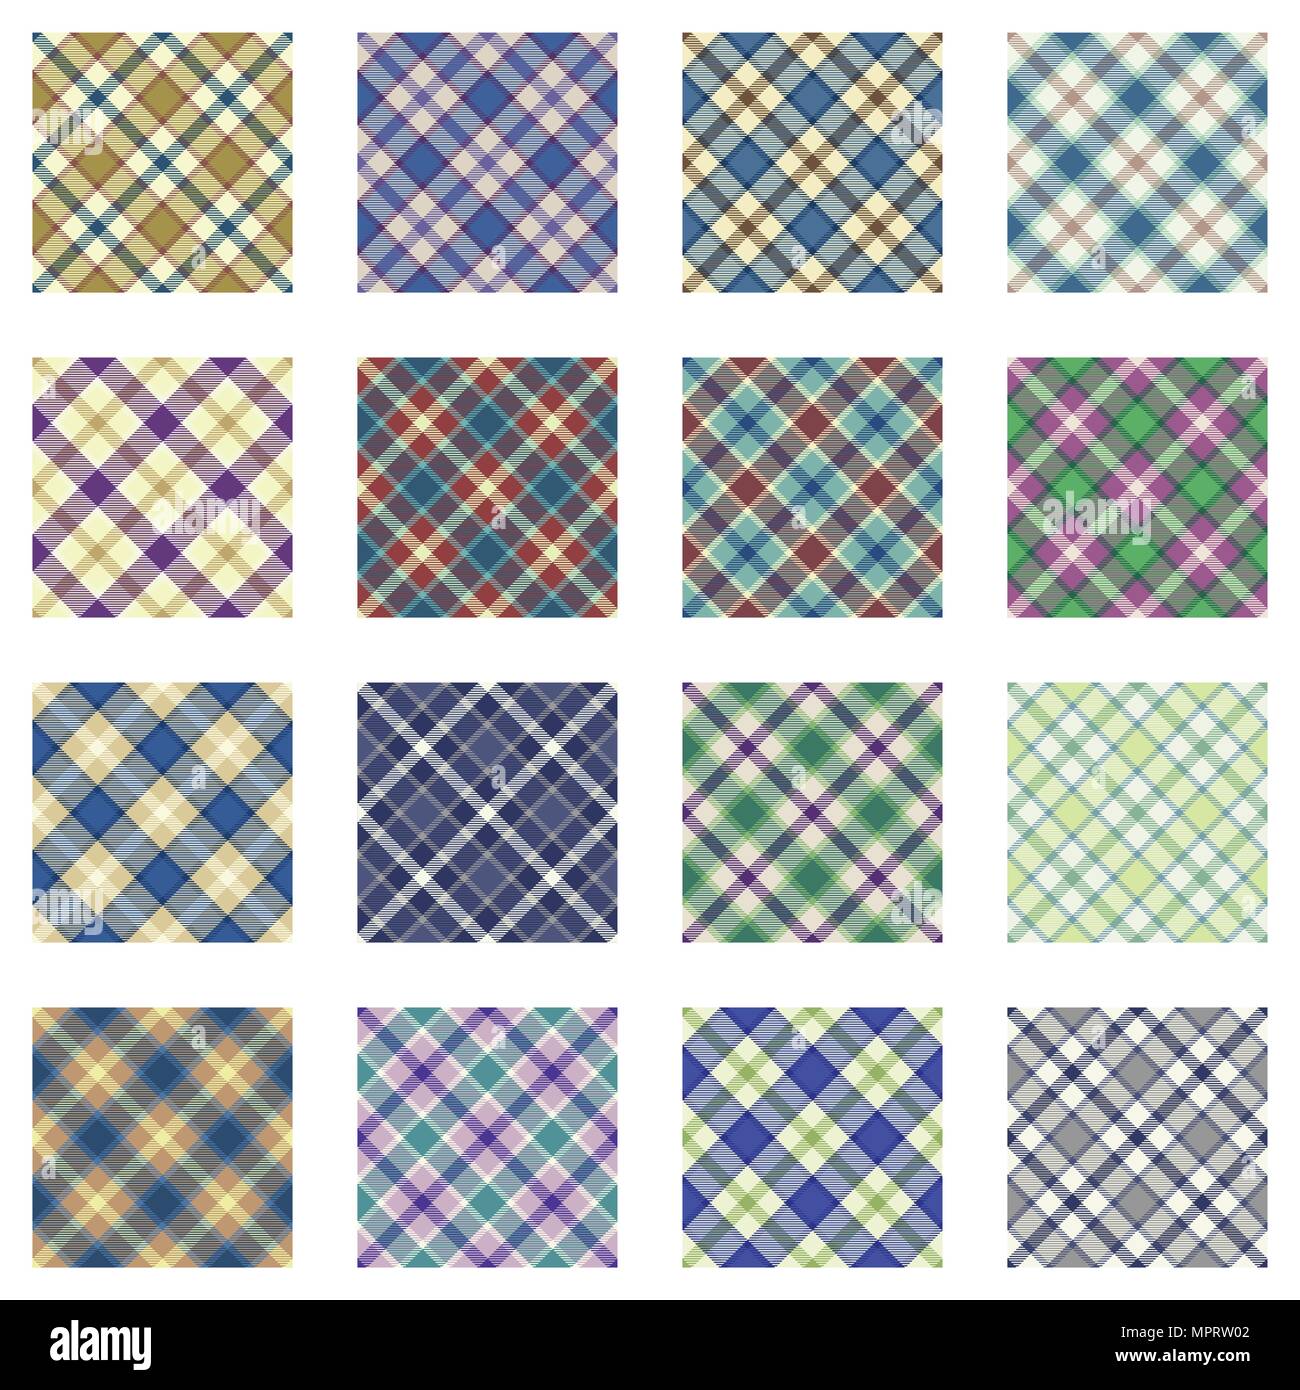 Plaid patterns collection, 16 seamless tartan patterns, muted shades, retro colors Stock Vector